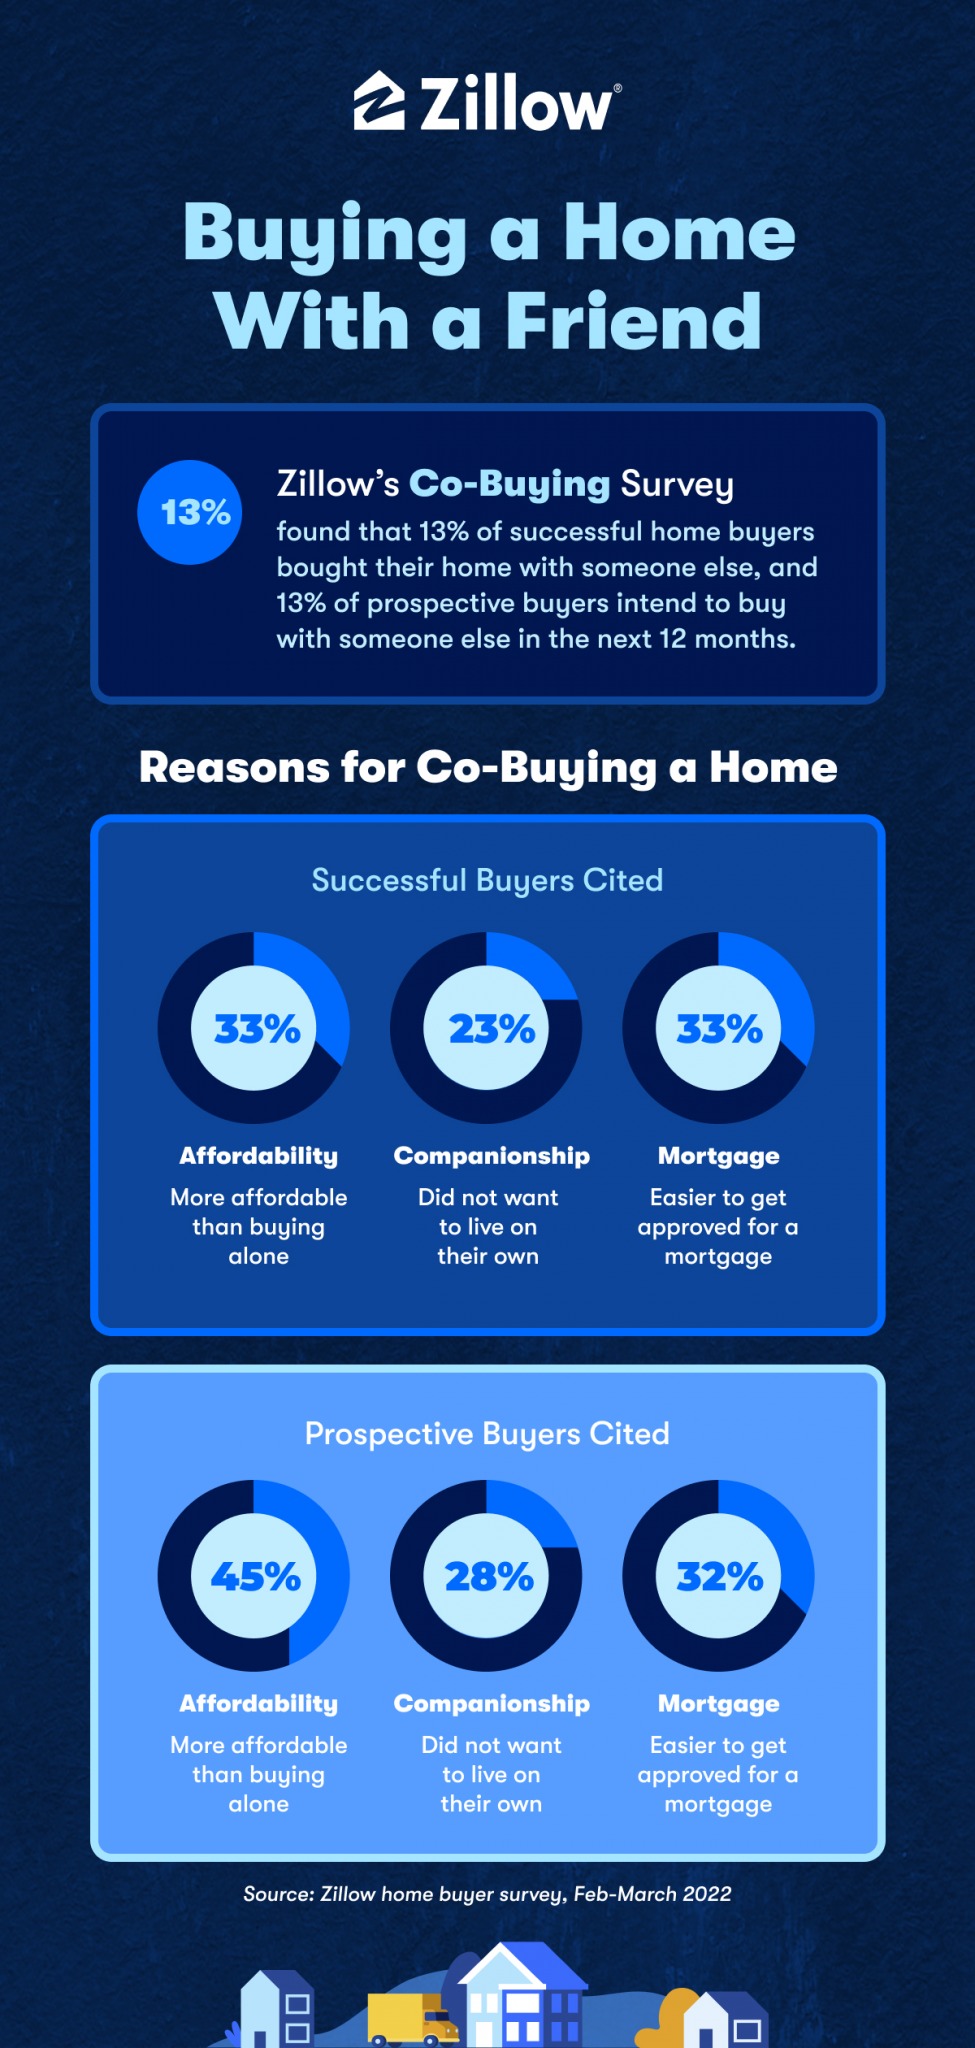 Buying a home with a friend: Zillow's Co-Buying Survey results